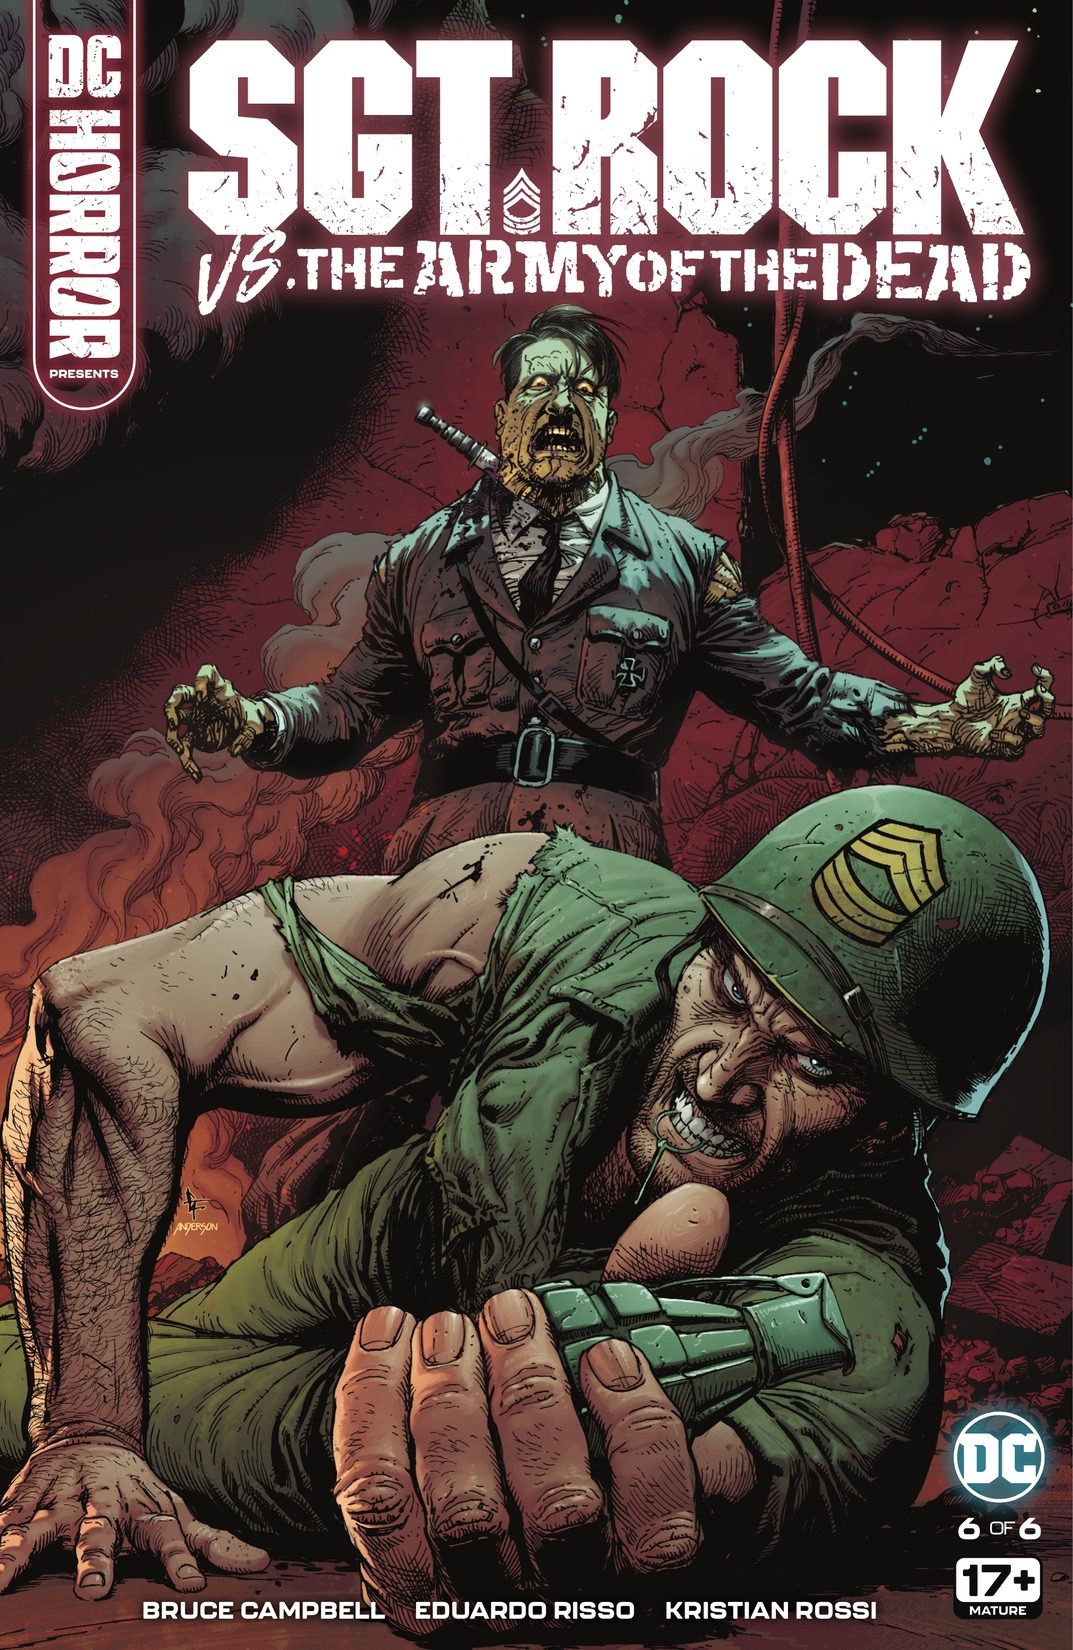 DC Horror Presents: Sgt. Rock vs. The Army of the Dead #6 preview images